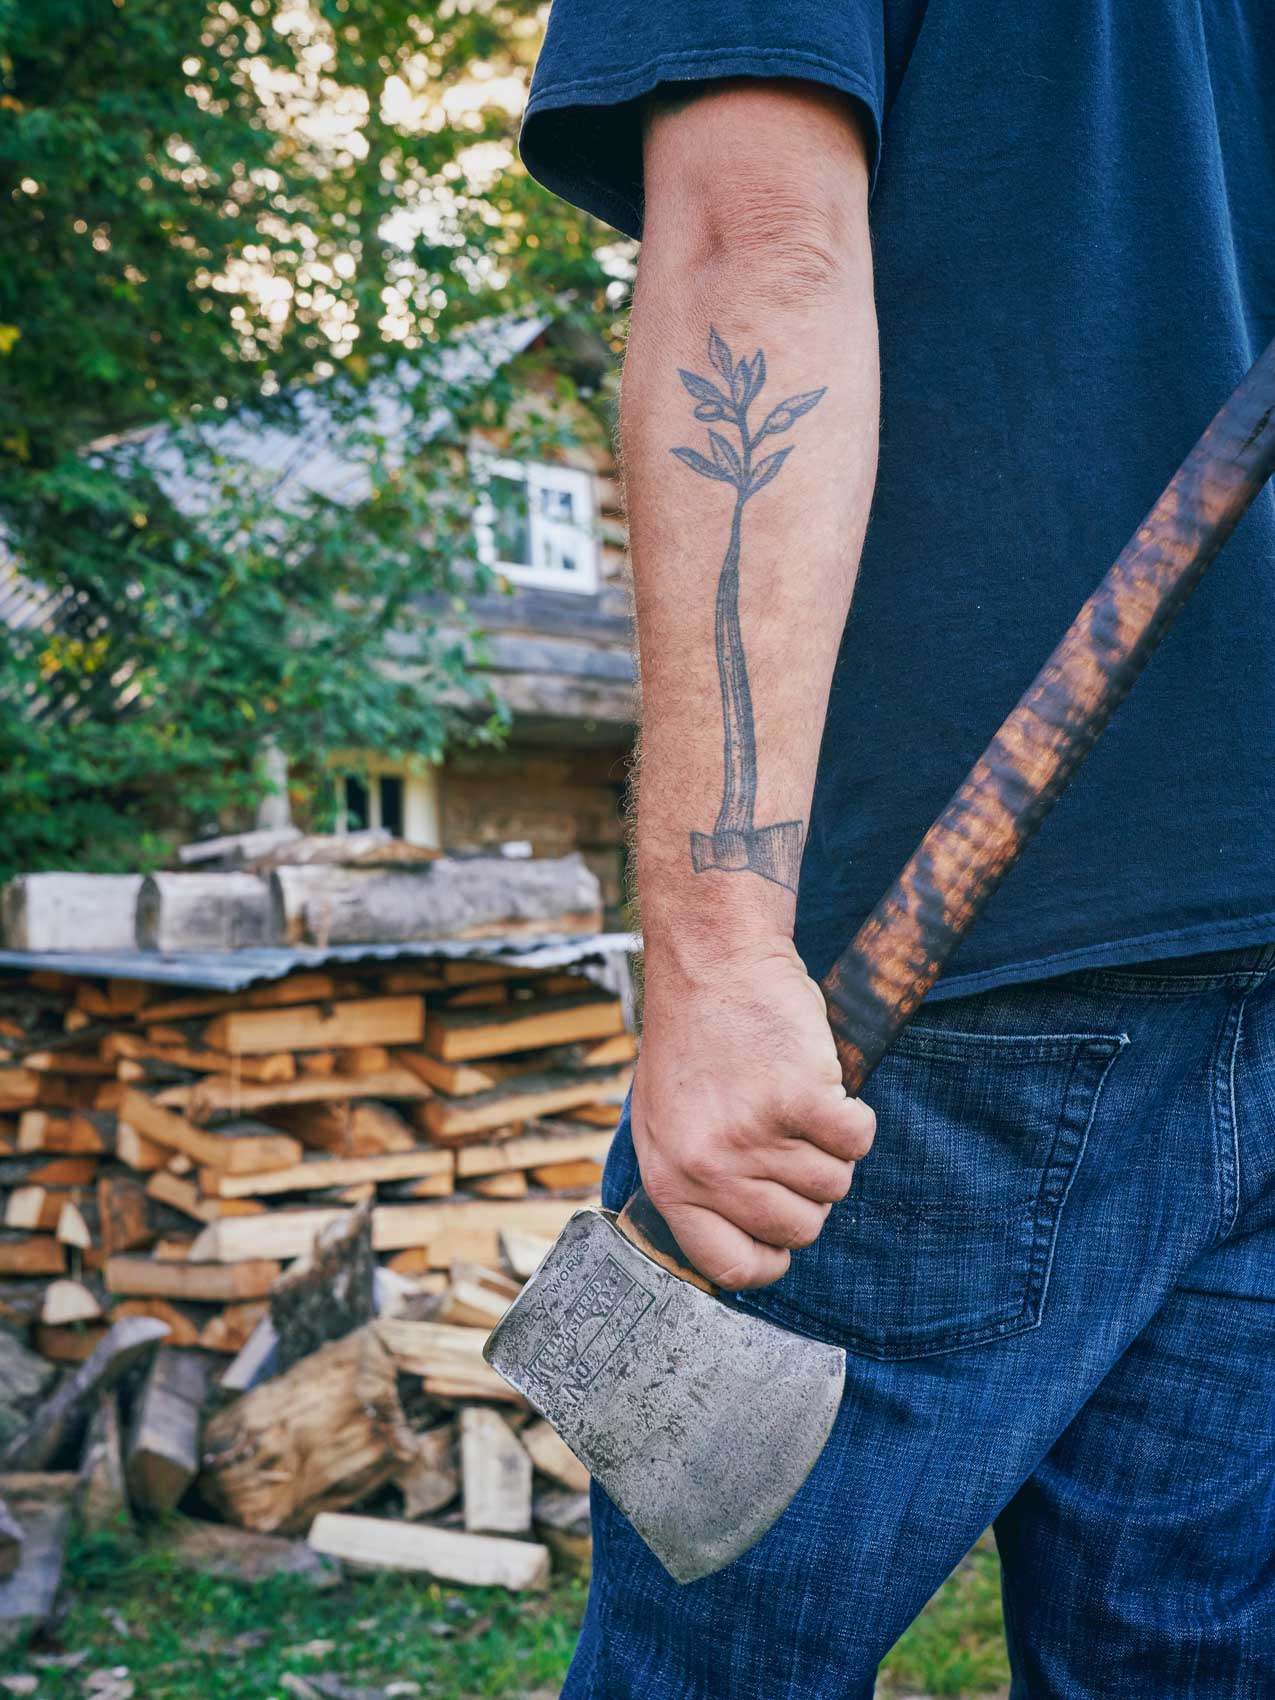 Axe Tattoo And A Vintage Axe